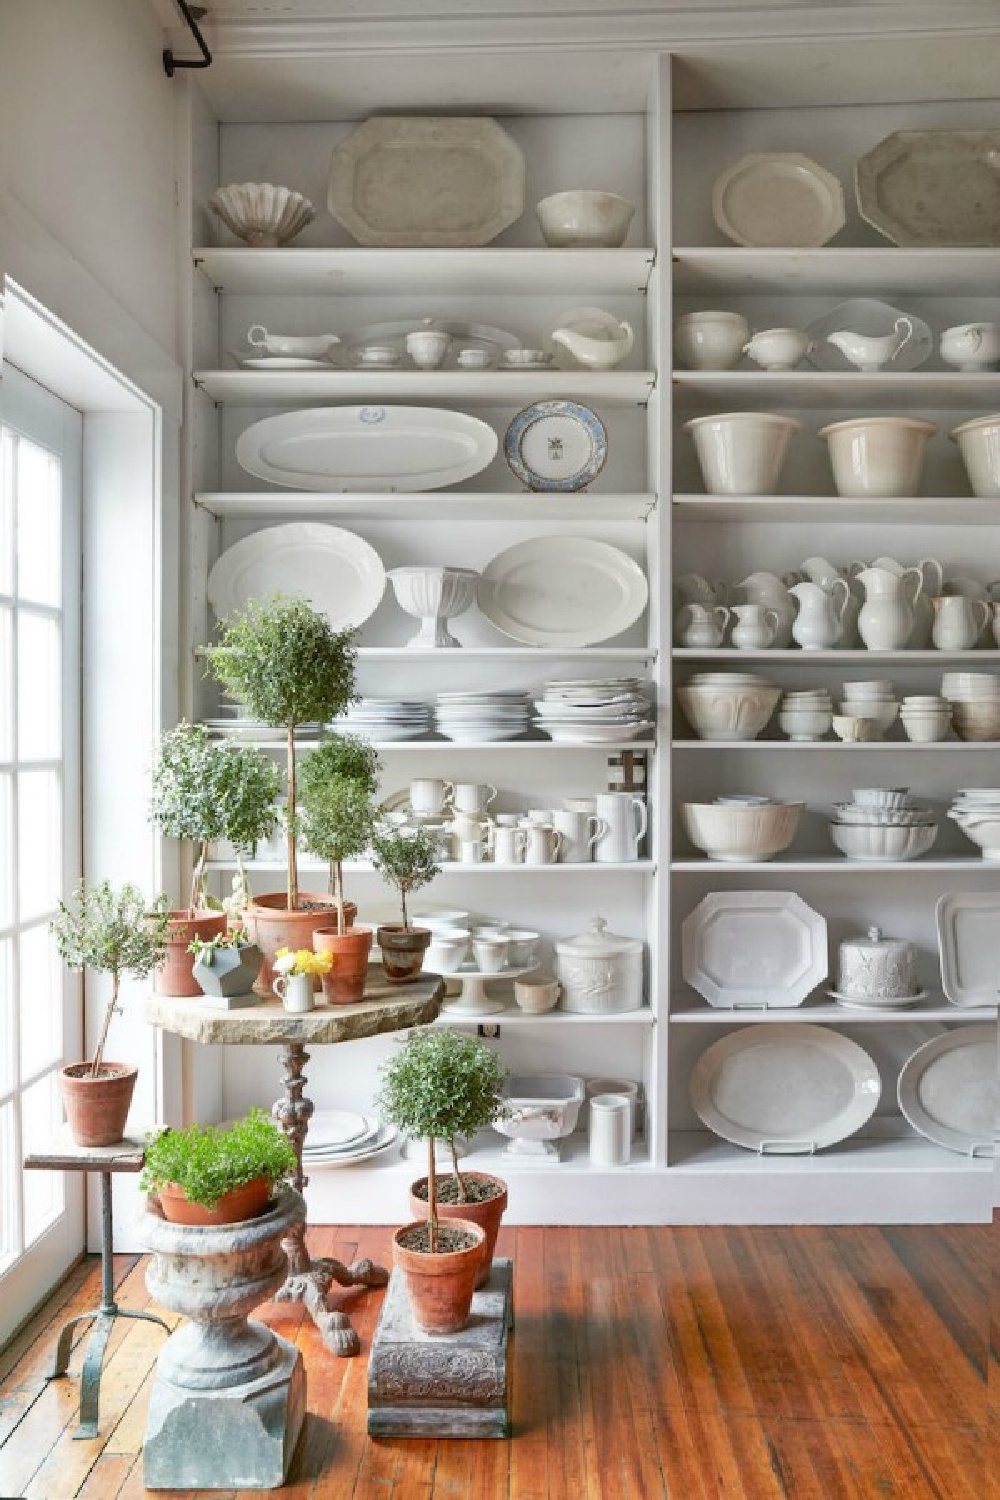 The charm of vertical built-in shelves in a vintage style kitchen is hard to beat! Ironstone, white dishware, and stoneware look elegant massed in this country style space with #shabbychic appeal. #ironstone #whitedecor #farmhousestyle